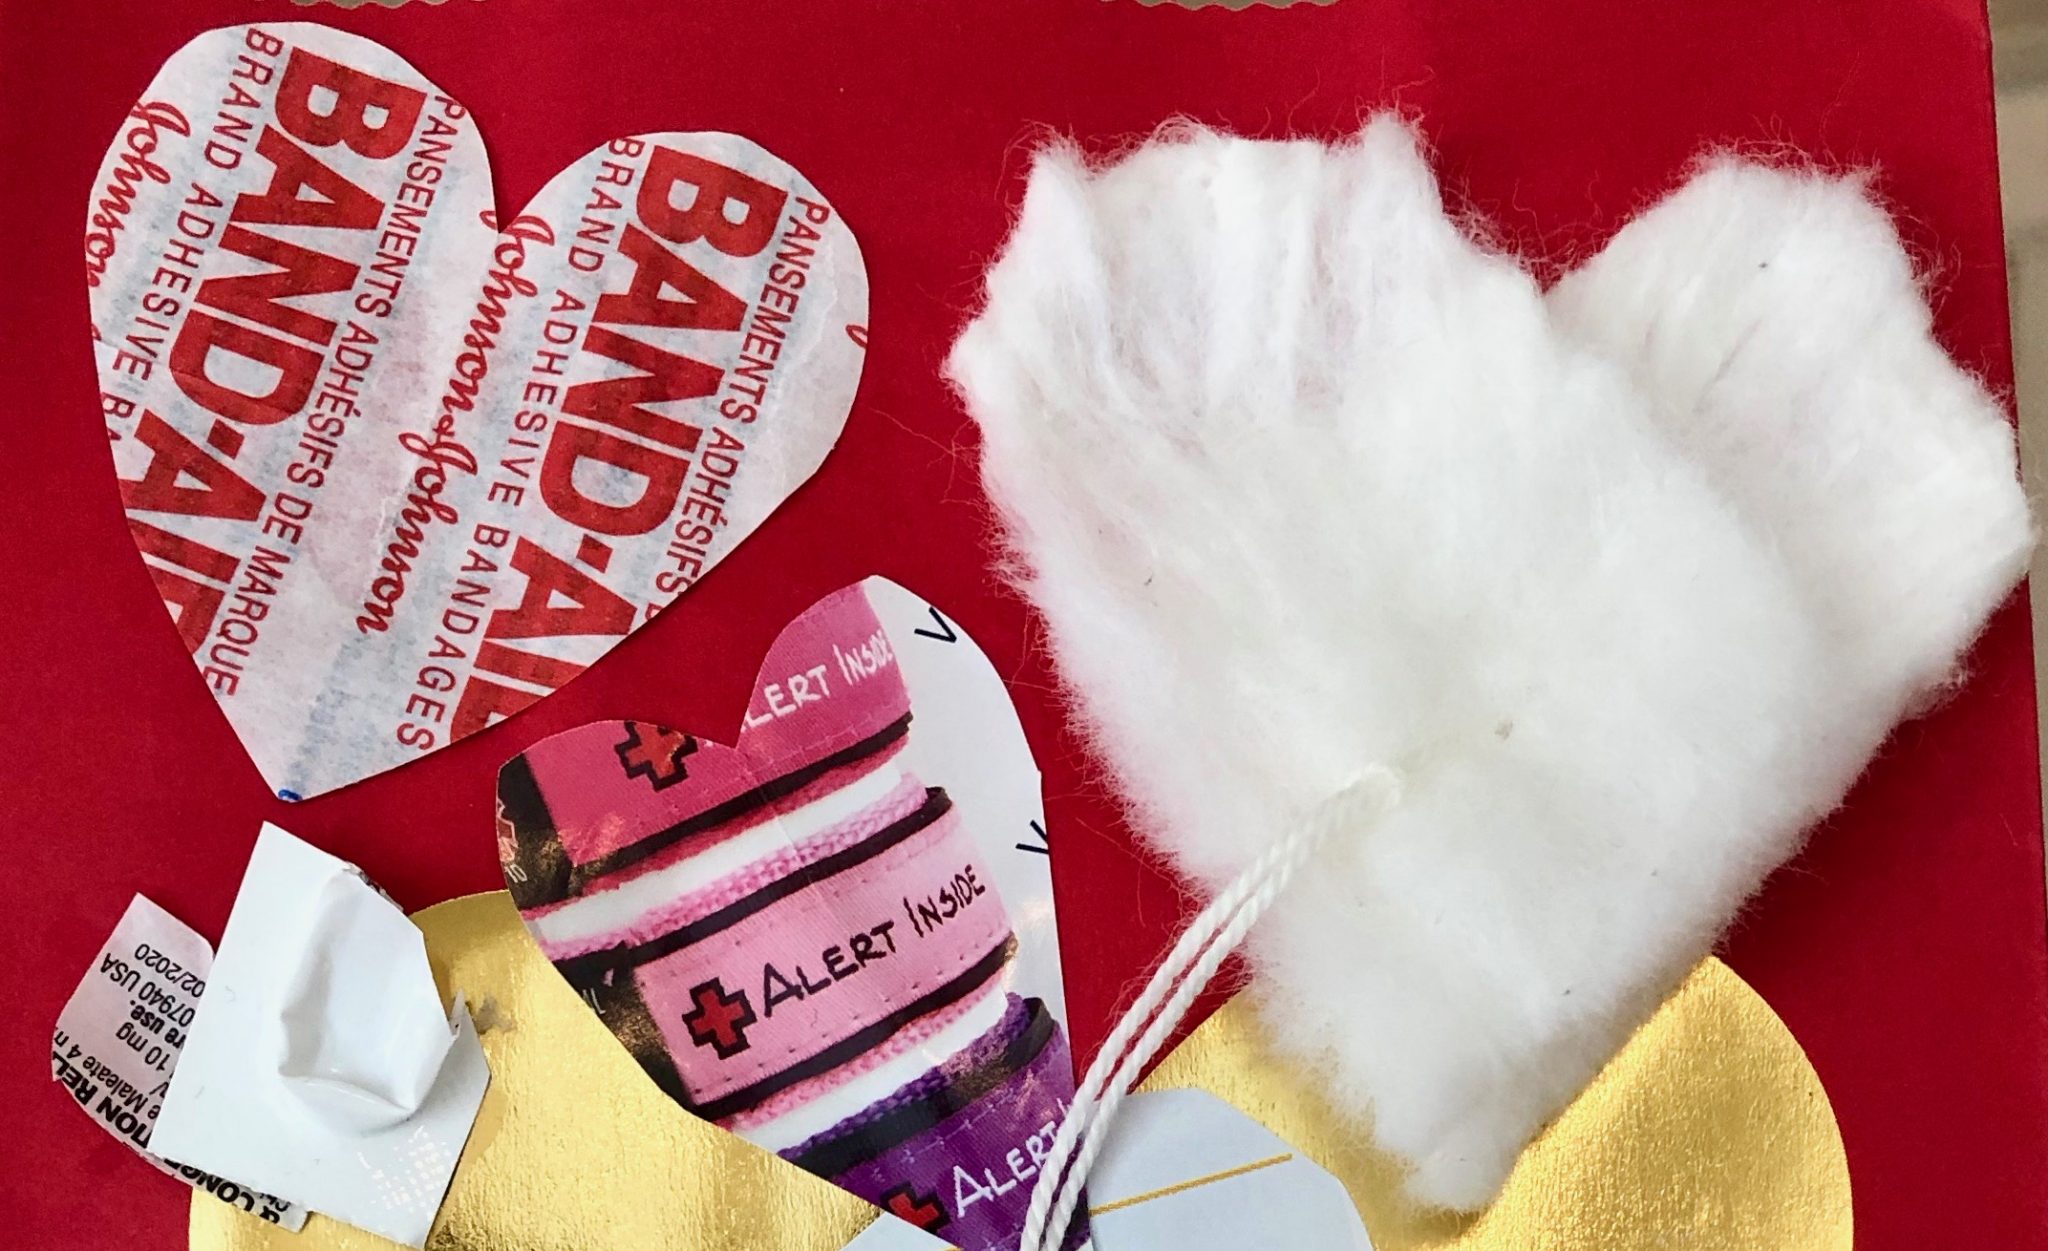 Honest valentine made from Band-aid wrappers & tampons